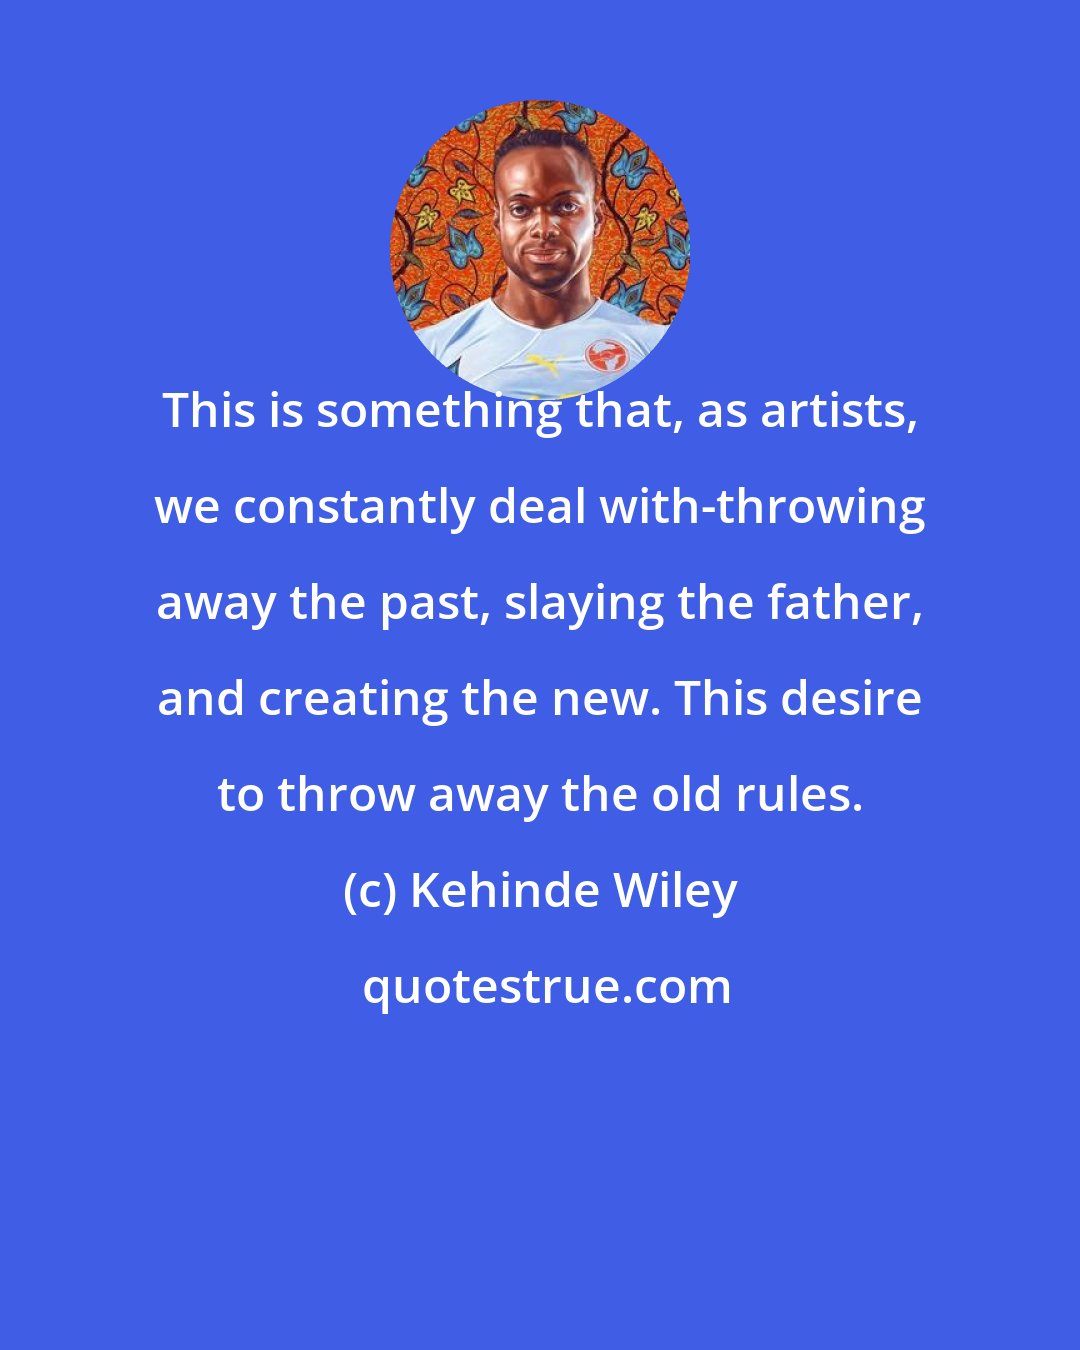 Kehinde Wiley: This is something that, as artists, we constantly deal with-throwing away the past, slaying the father, and creating the new. This desire to throw away the old rules.